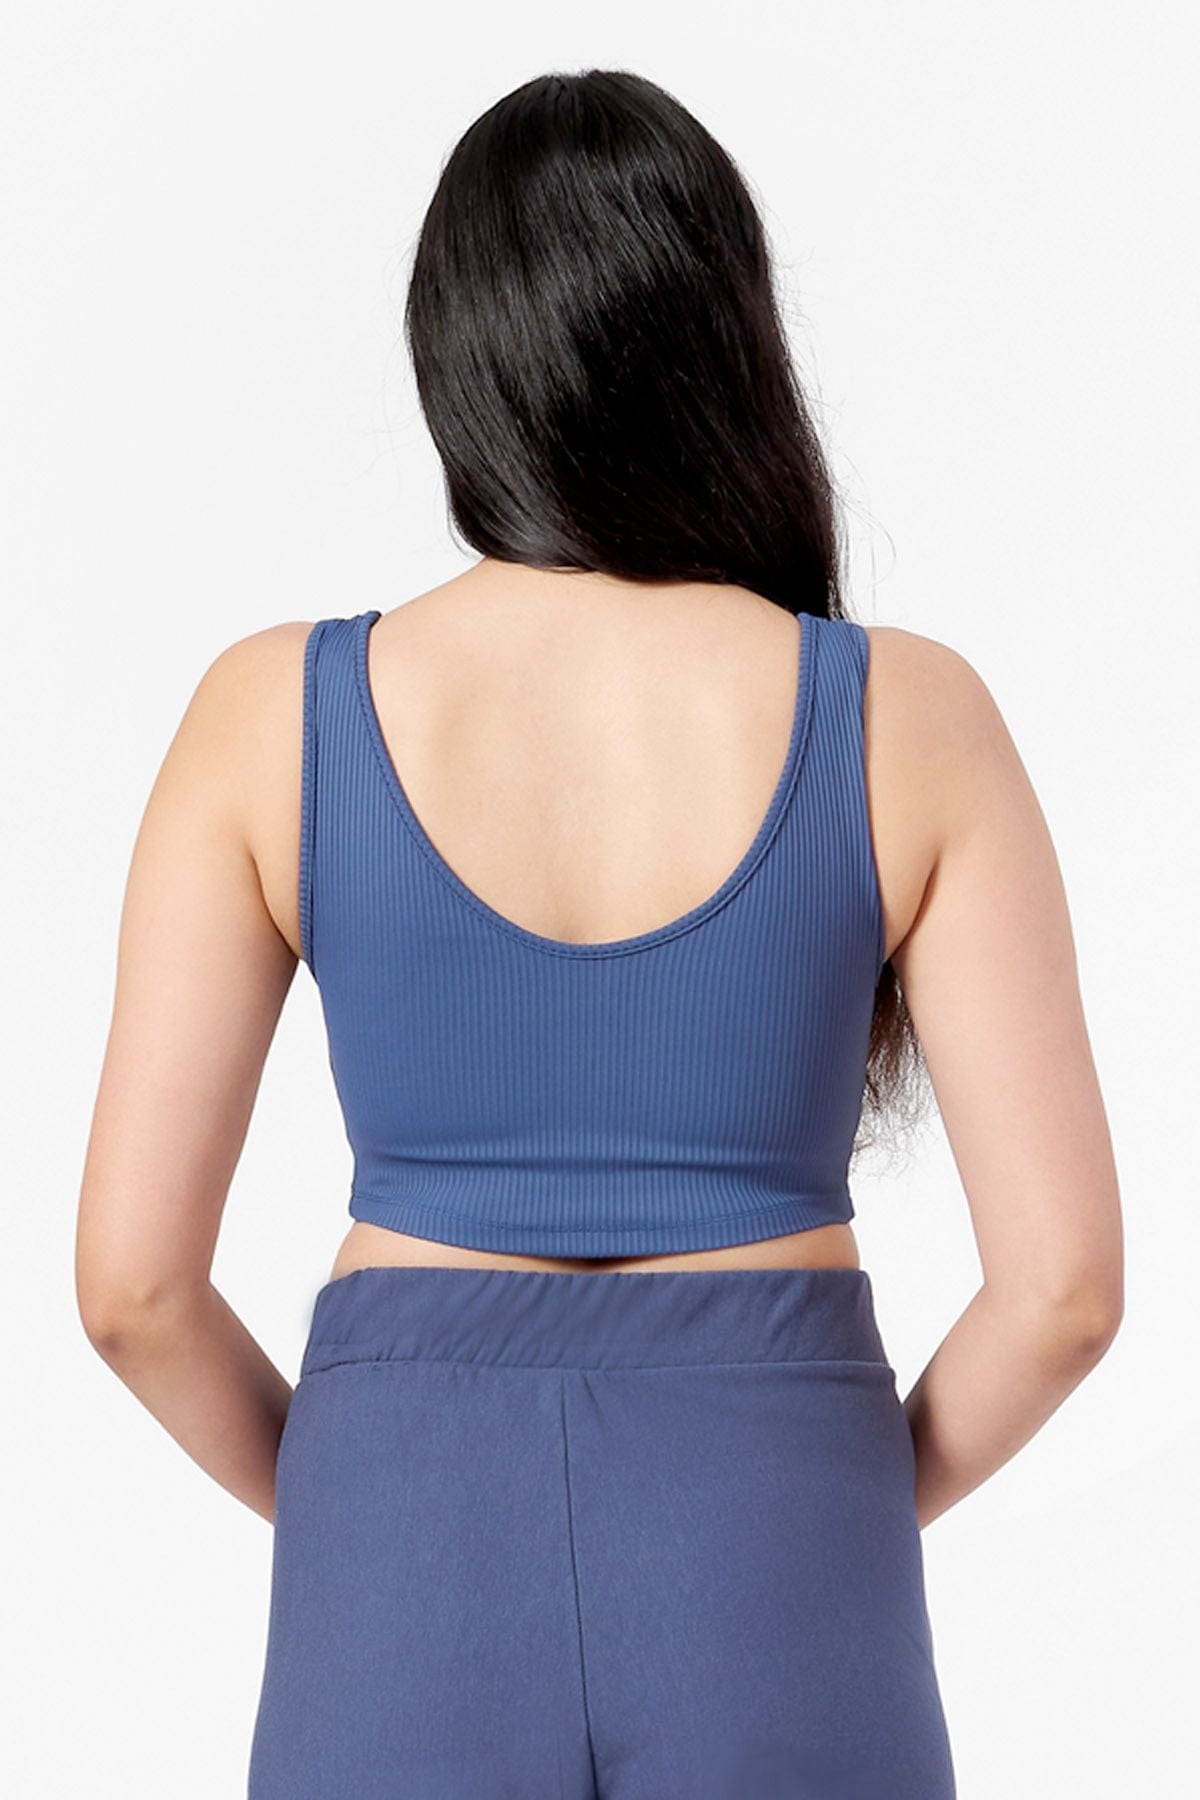 the back view of a woman wearing a blue crop top with a low scoop neck line